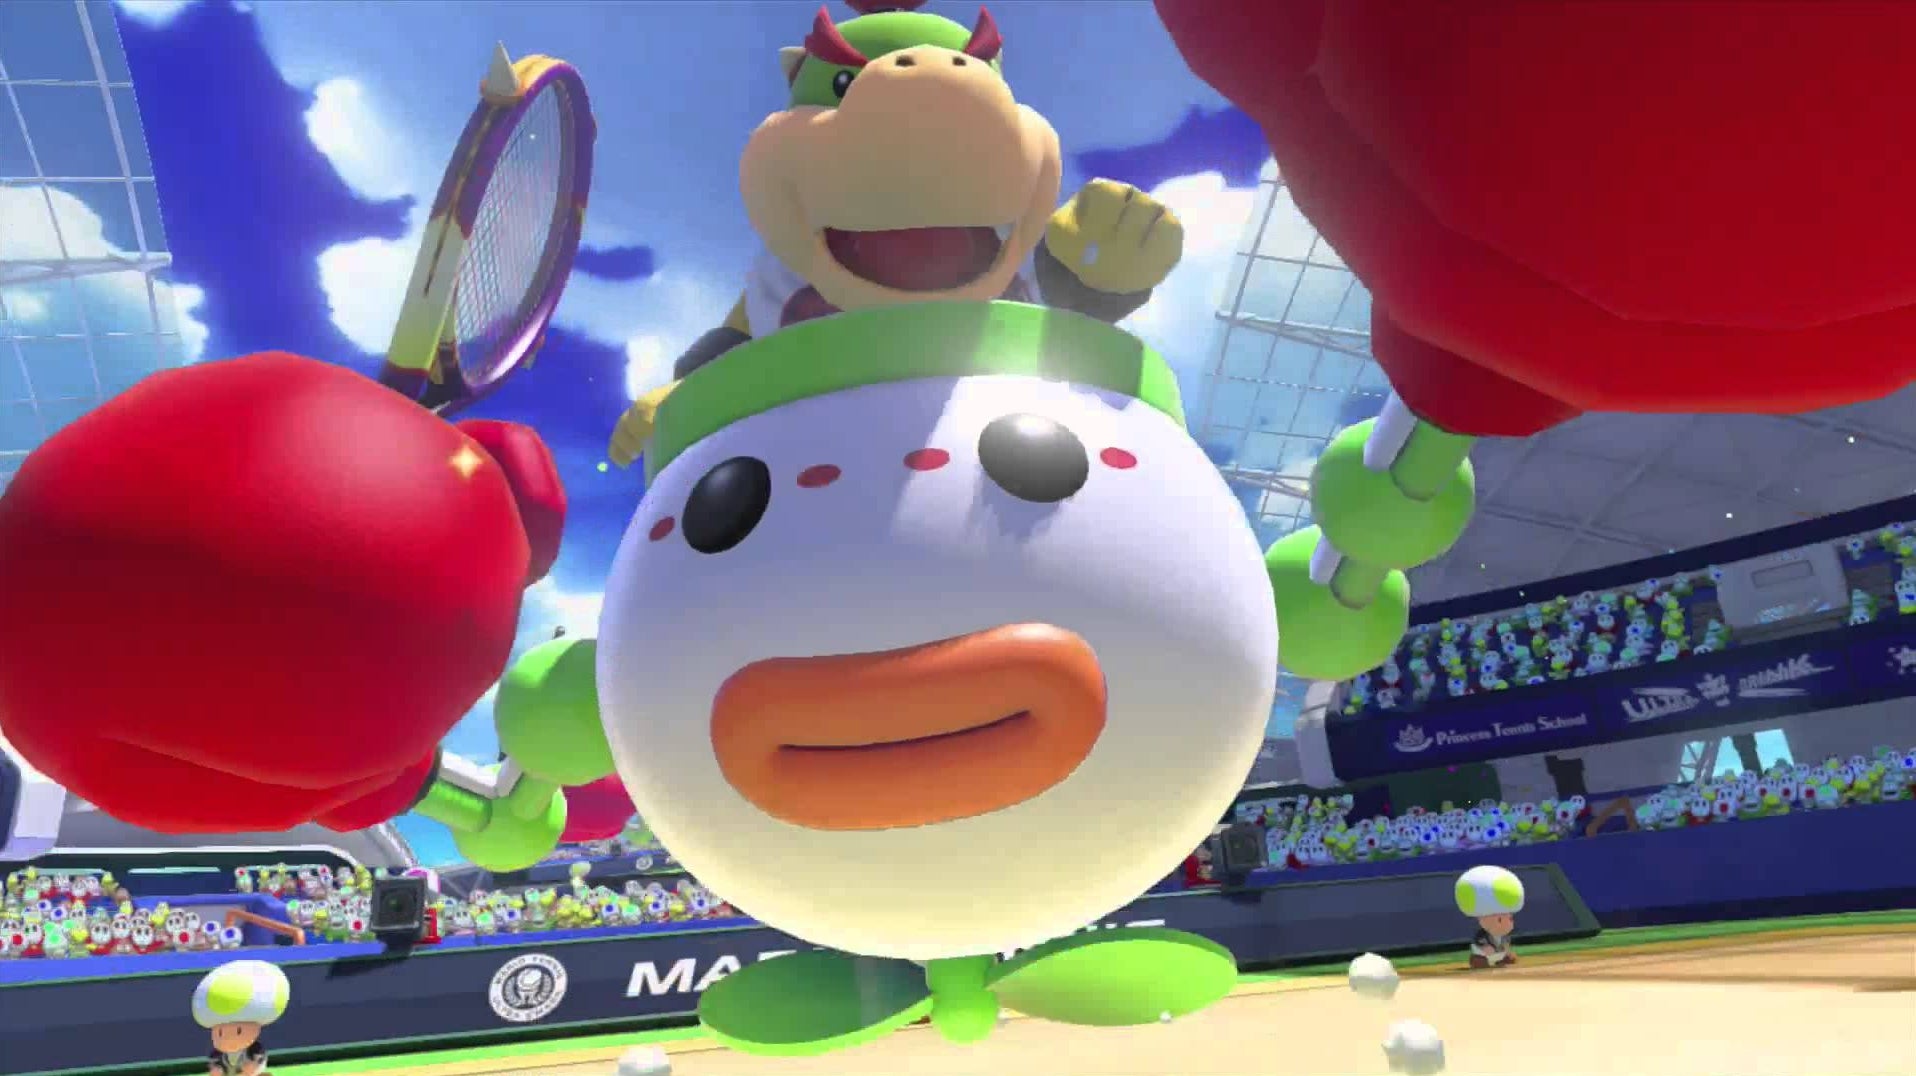 Image for Mario Tennis Aces' Bowser Jr. is being nerfed again